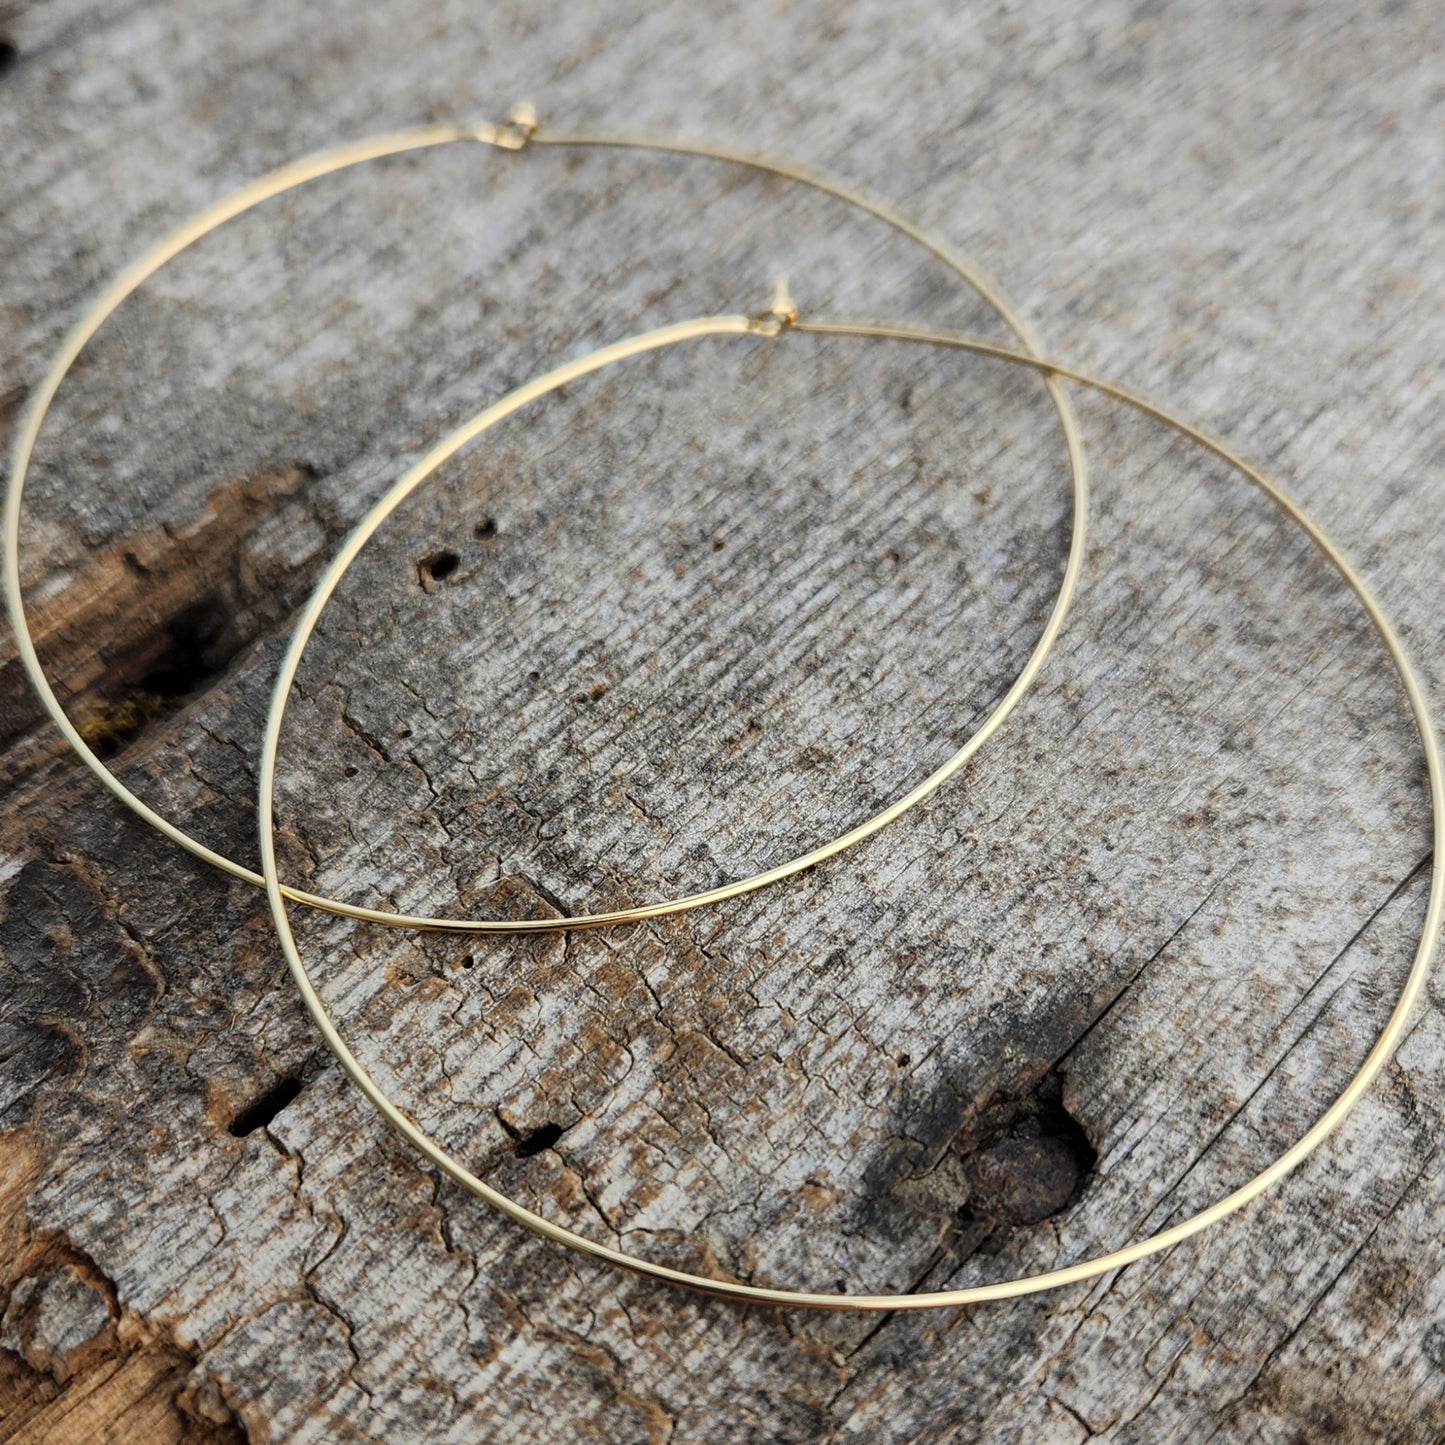 Barely There Hoops